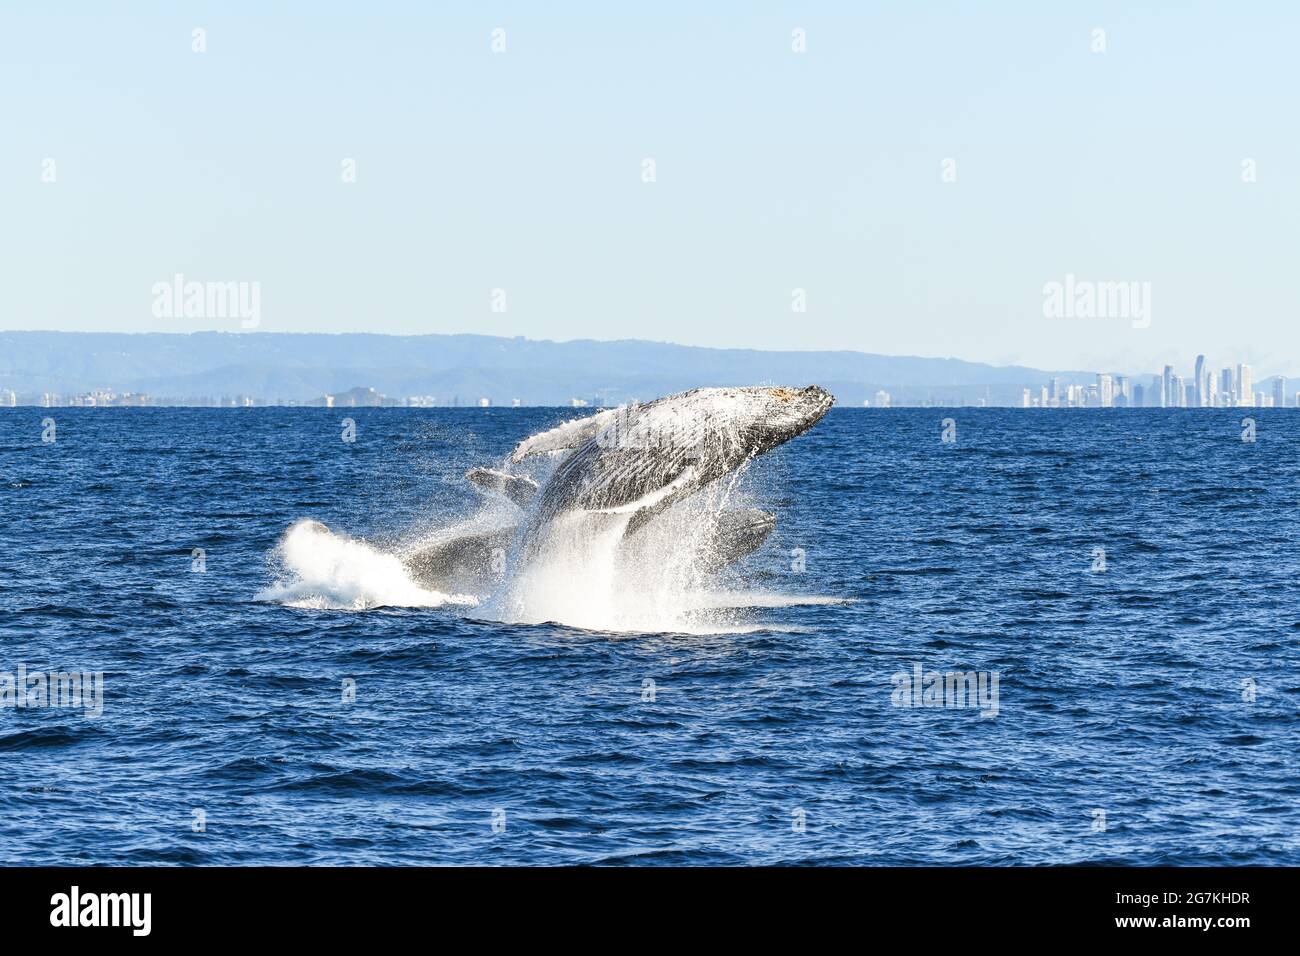 One whale breaching over another whale that has just breached Stock Photo